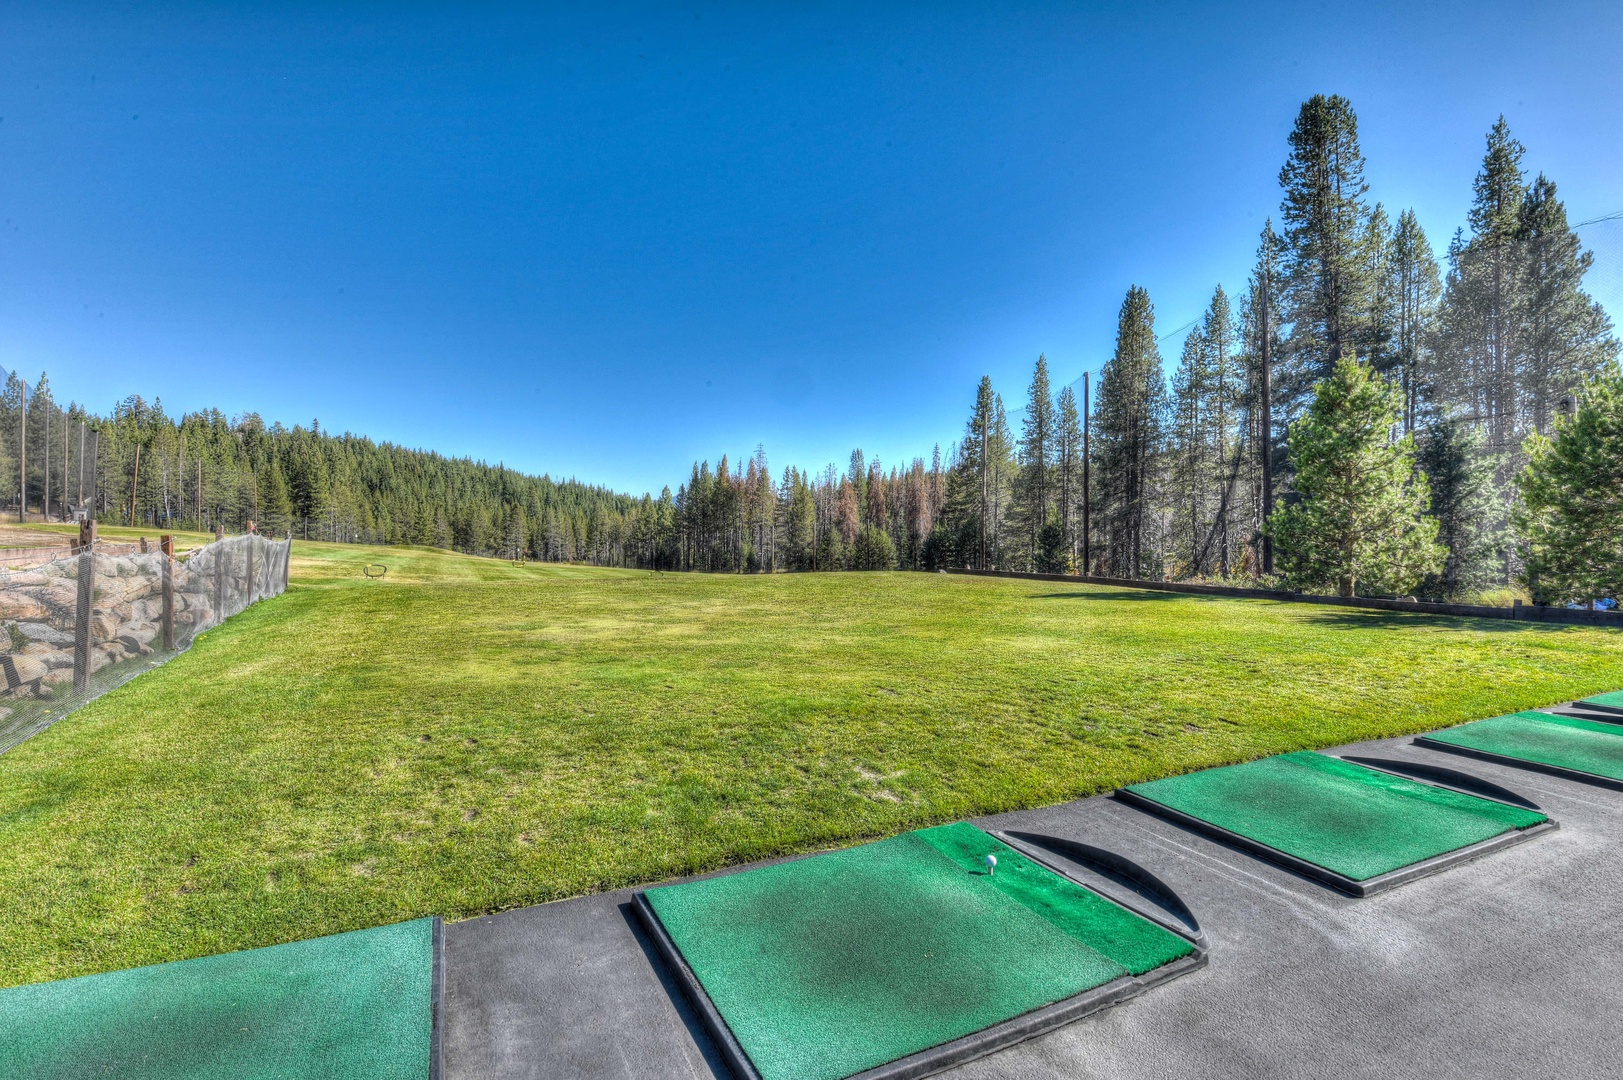 Tahoe Donner & Trout Creek Recreation Center Putting Green Access